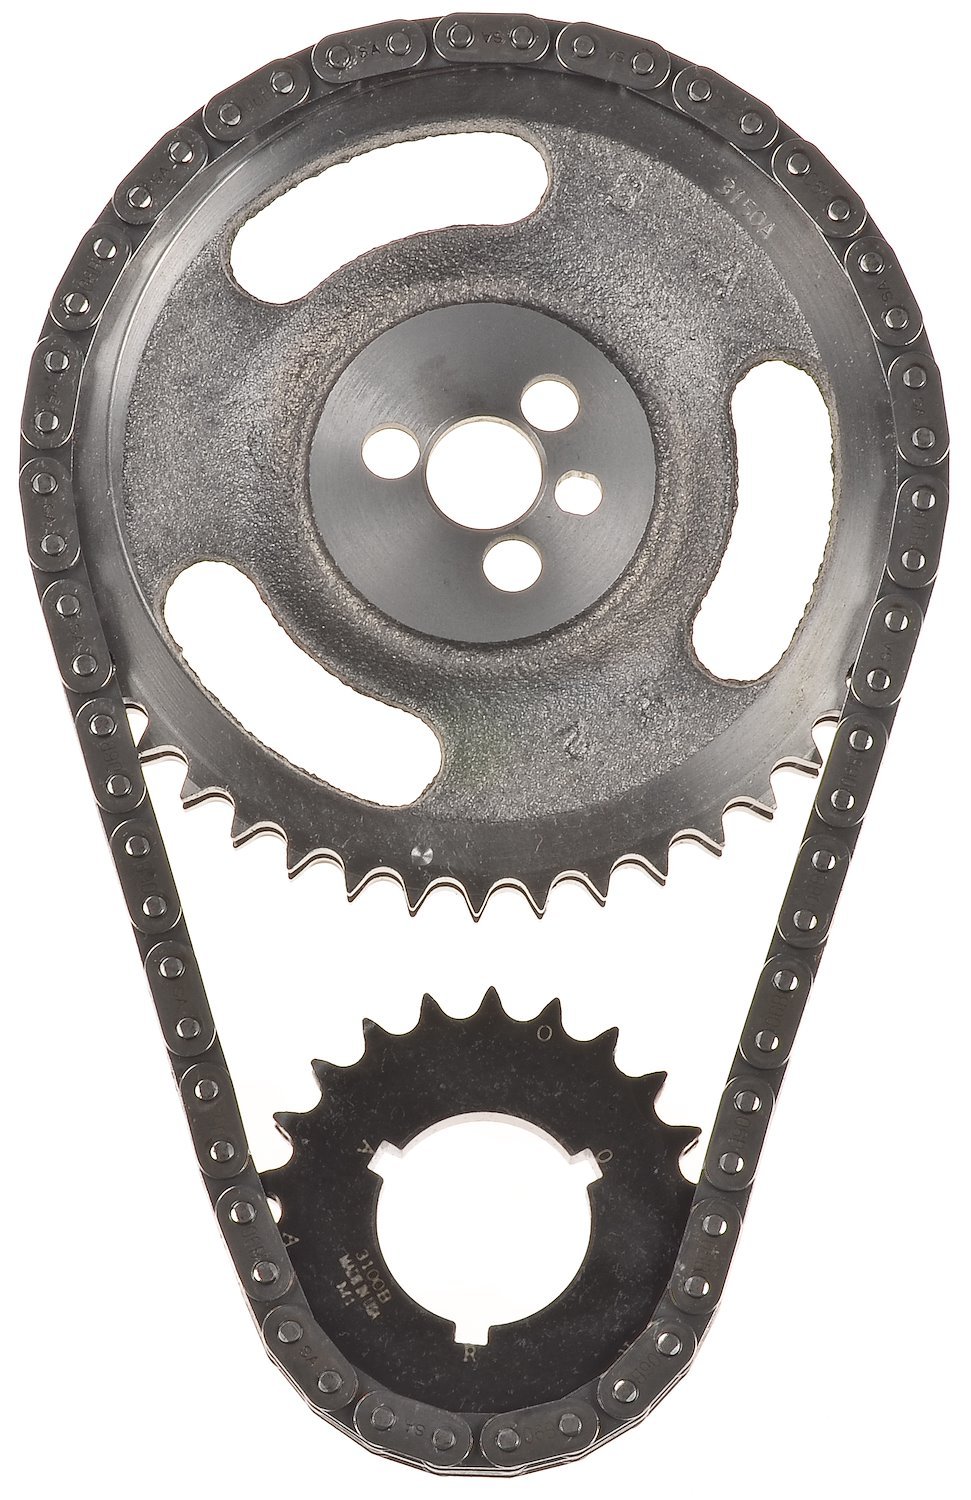 Timing Chain Set for 1987-1992 Small Block Chevy 305-350